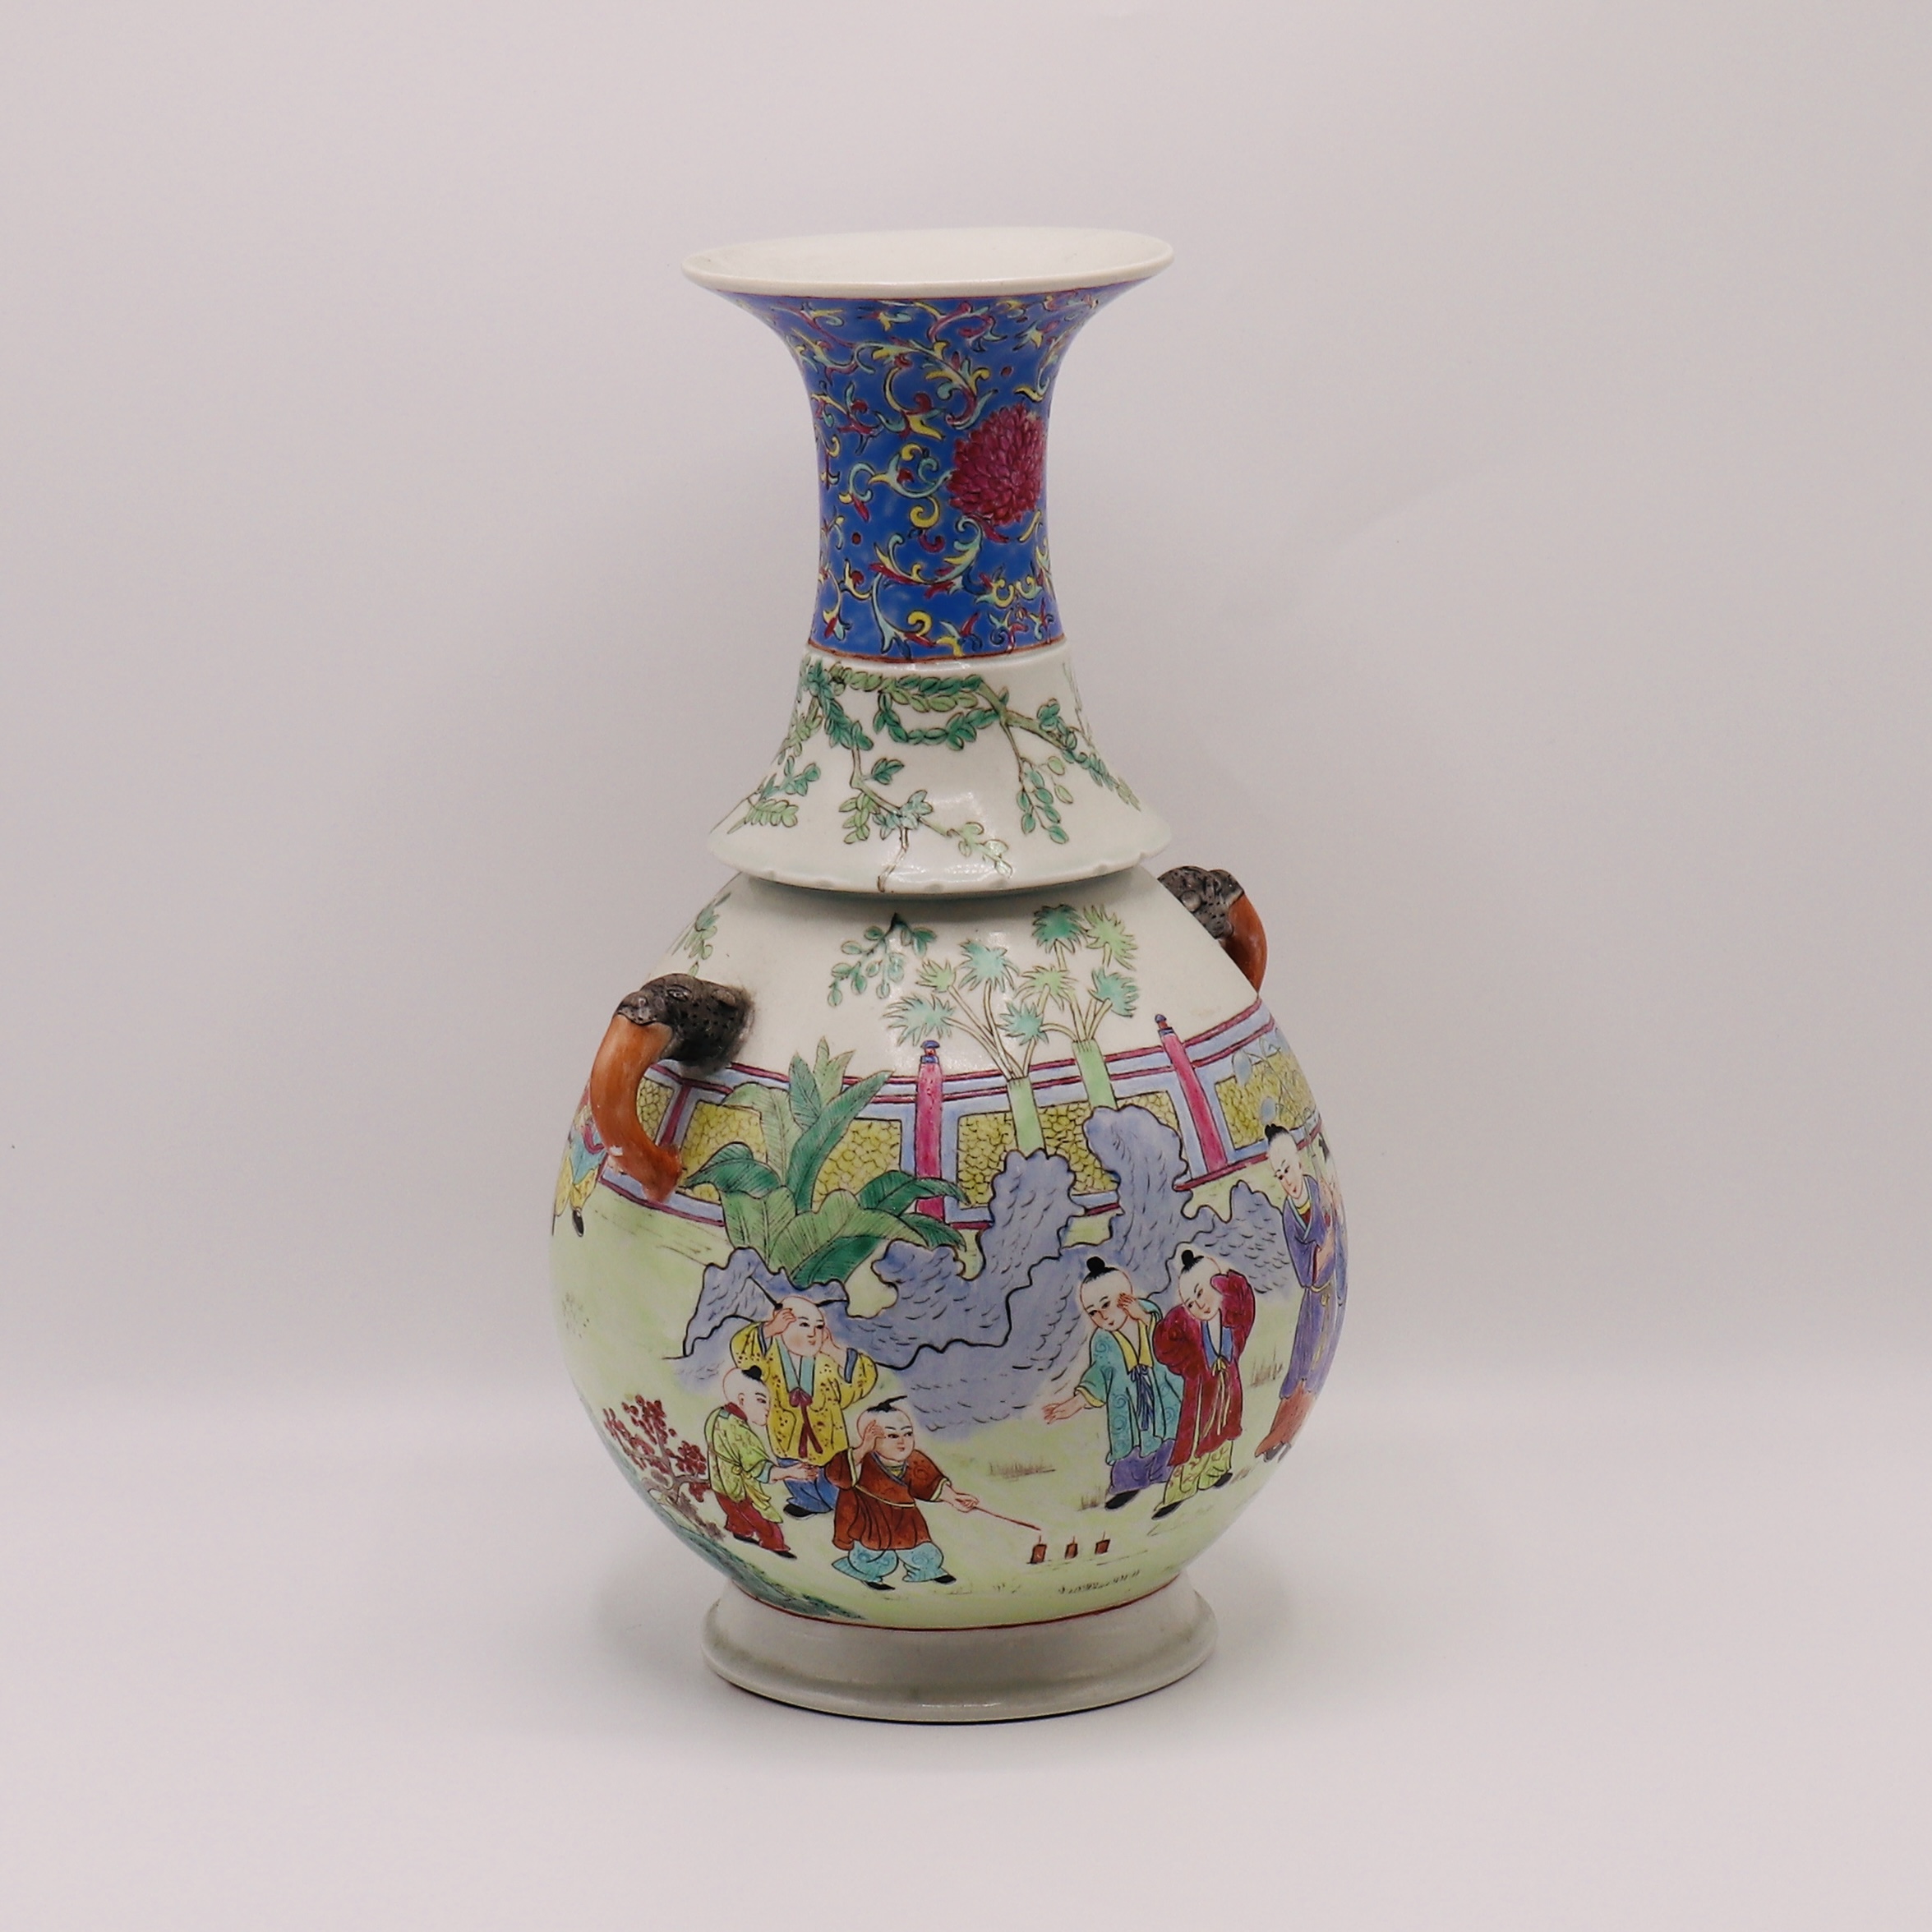 A LARGE CHINESE FAMILLE ROSE VASE, QING DYNASTY (1644-1911) - Image 3 of 5